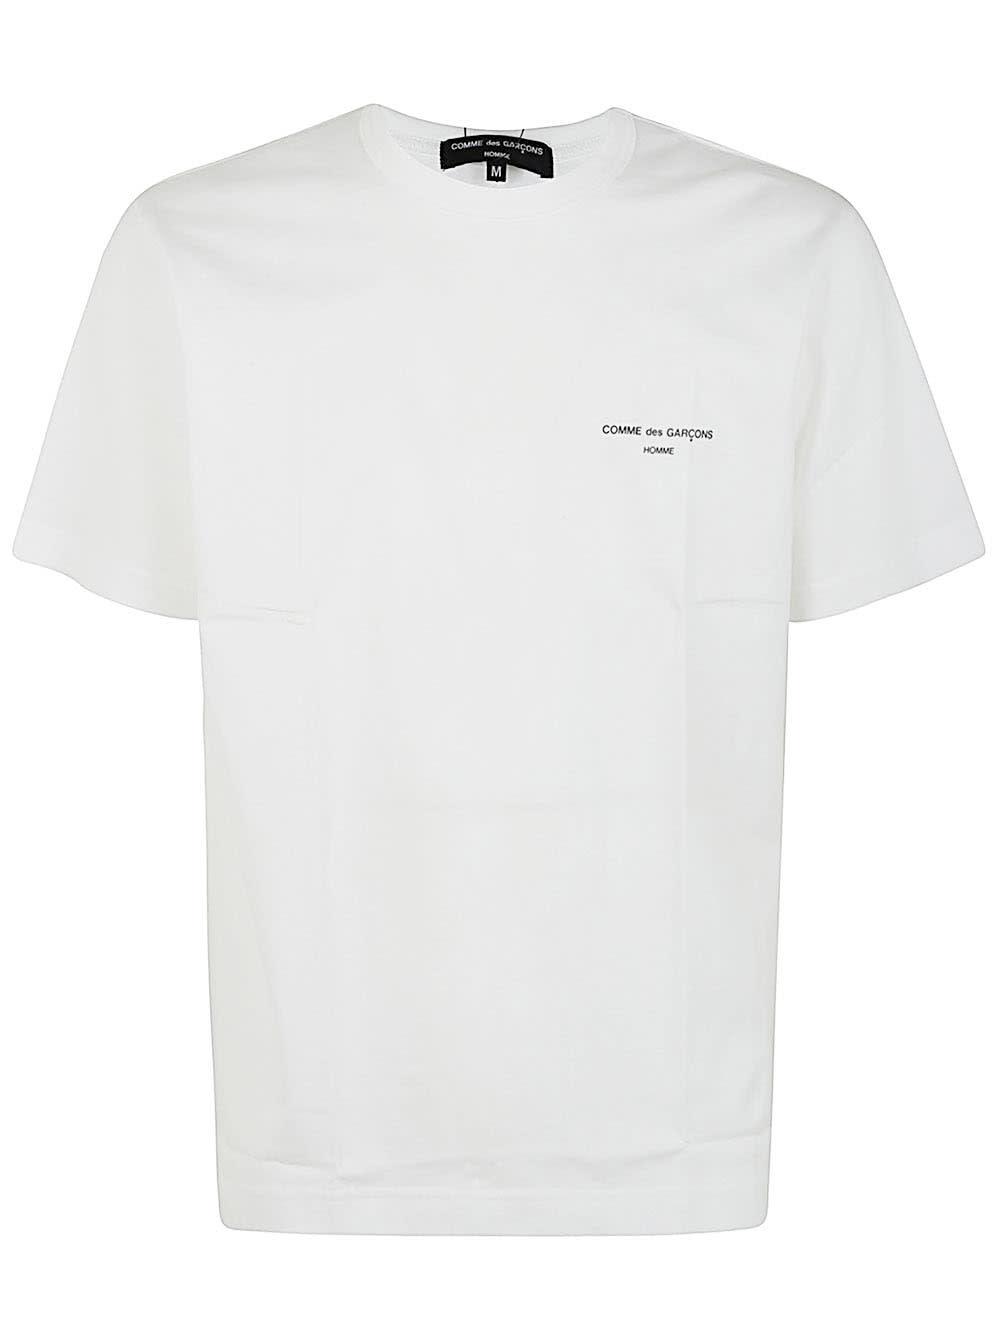 Comme des Garçons Iconic T-shirt With Logo in White for Men | Lyst